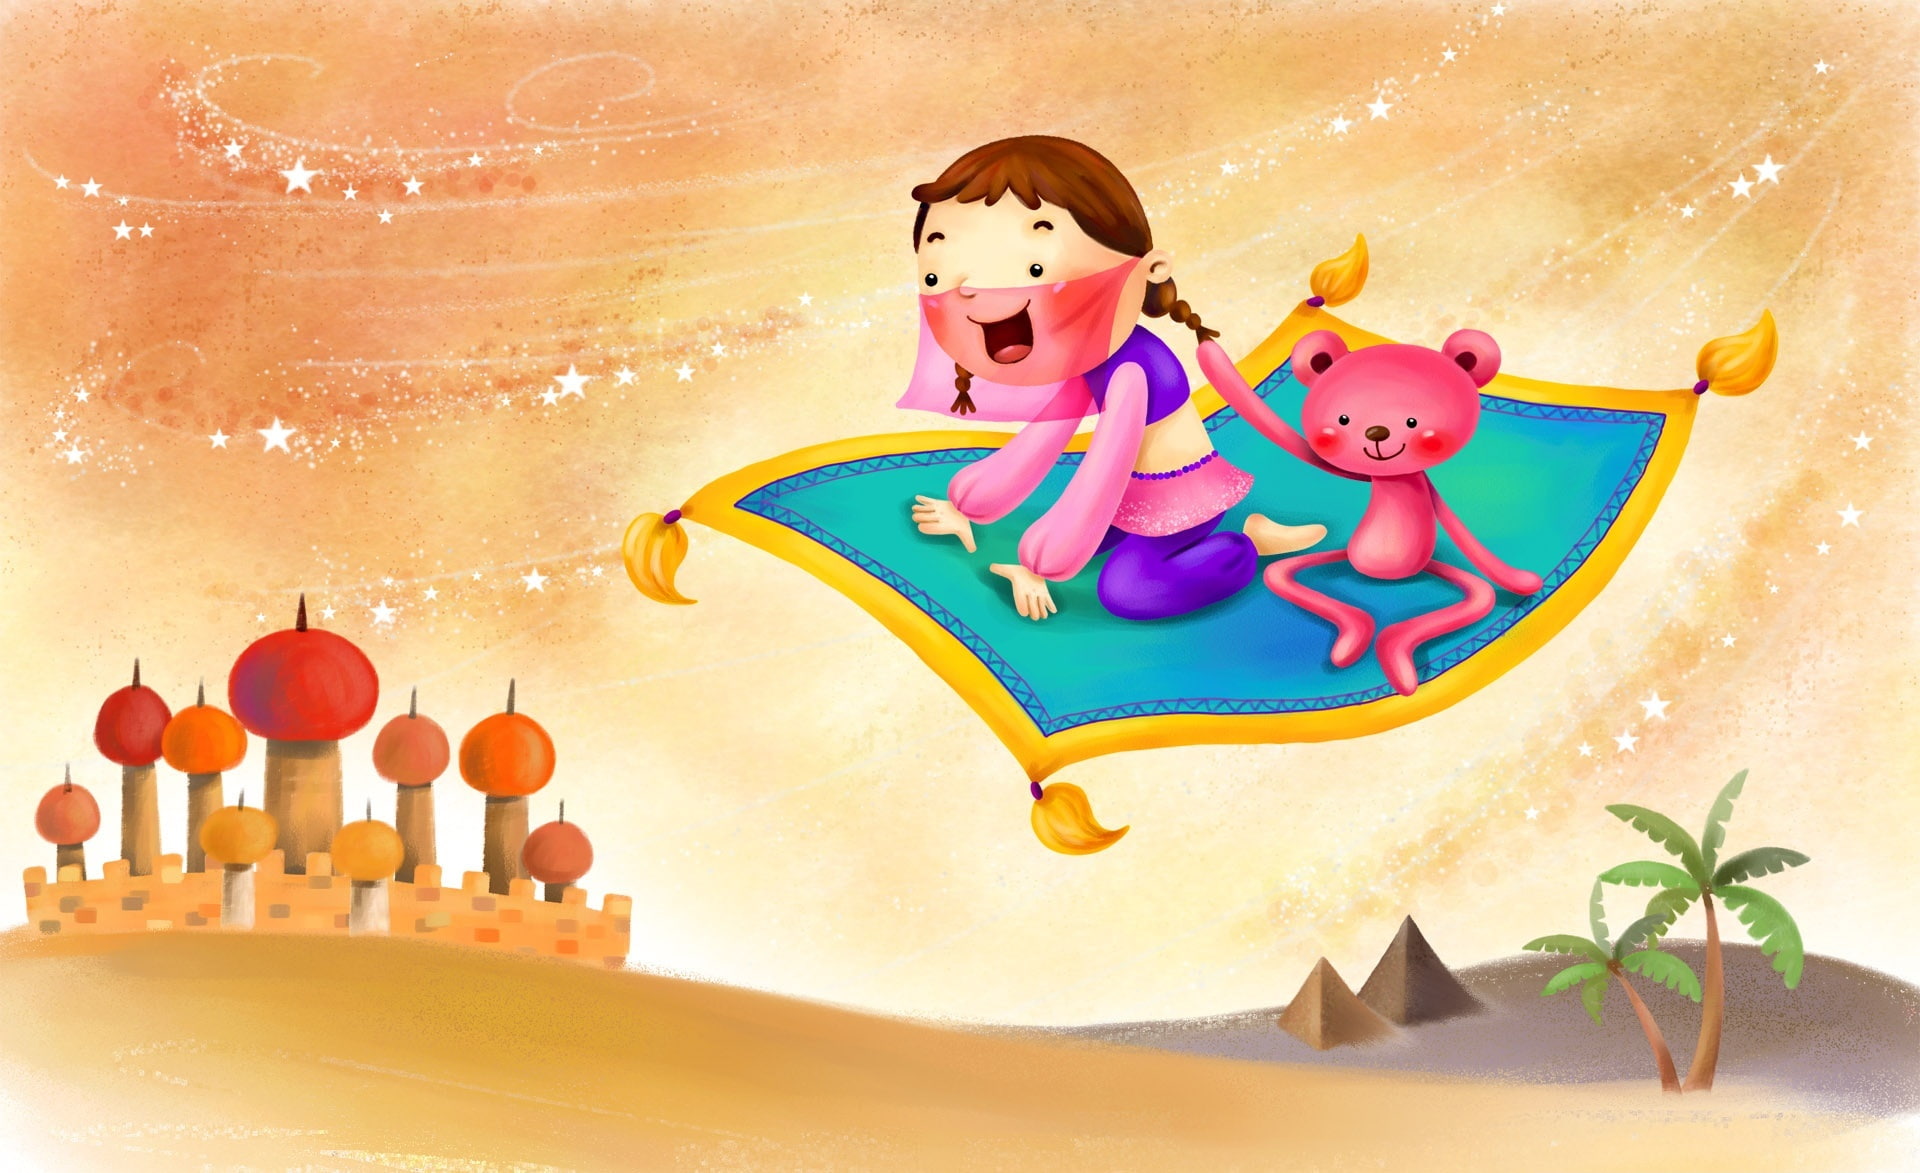 Children's Day, woman riding magic carpet with bear illustration